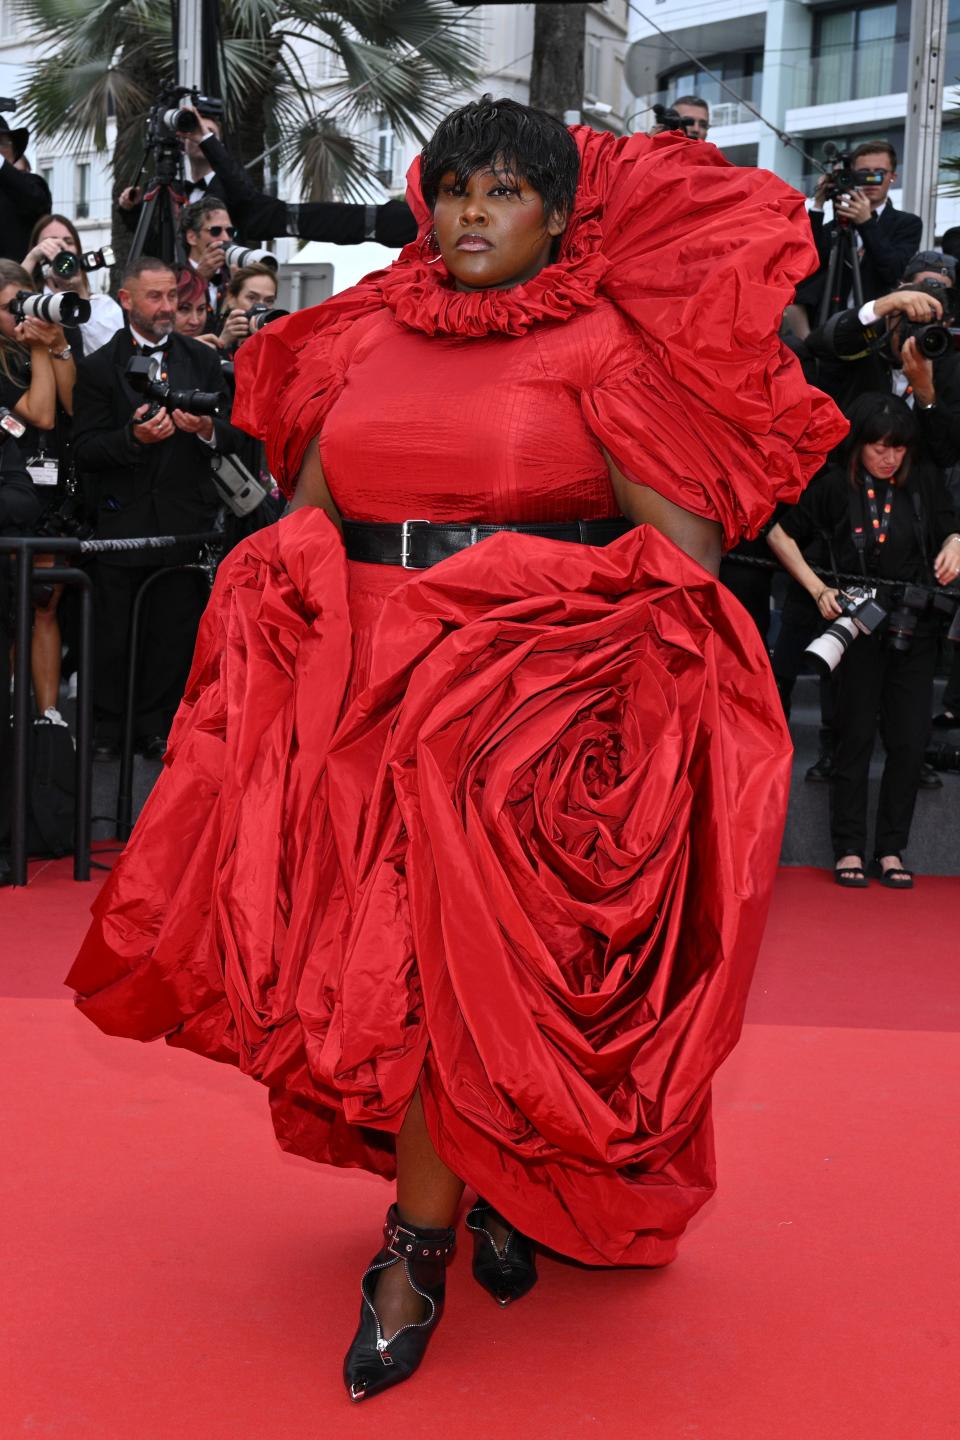 WHO: Yseult<br> WHAT: Alexander McQueen<br> WHERE: The 2023 Cannes Film Festival in Cannes, France<br> WHEN: May 18